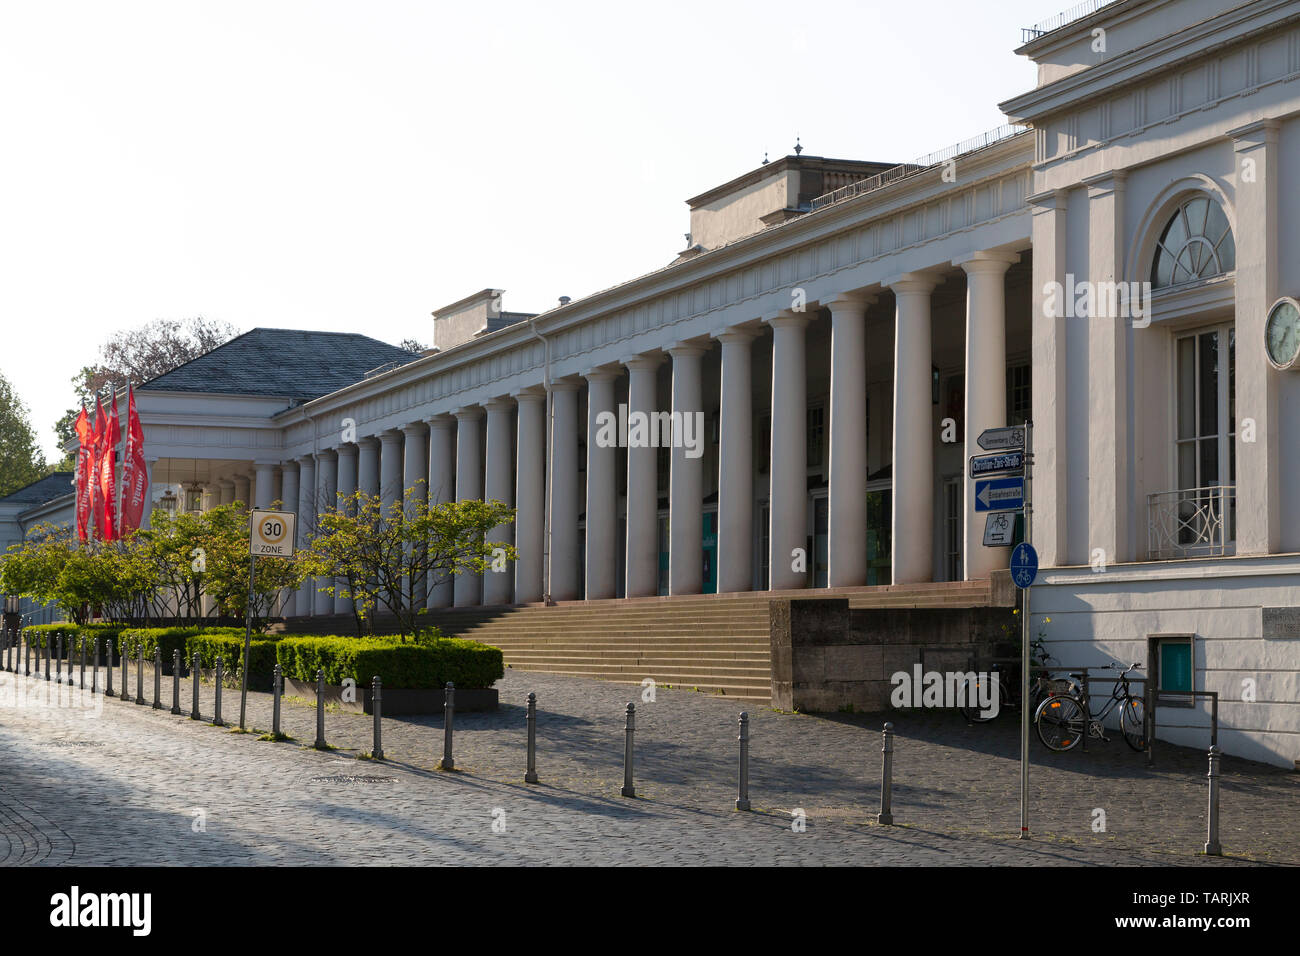 The colonnaded facade of the Hessisches Staatstheater (State Theatre of Hesse) in Wiesbaden, the state capital of Hesse, Germany. Stock Photo